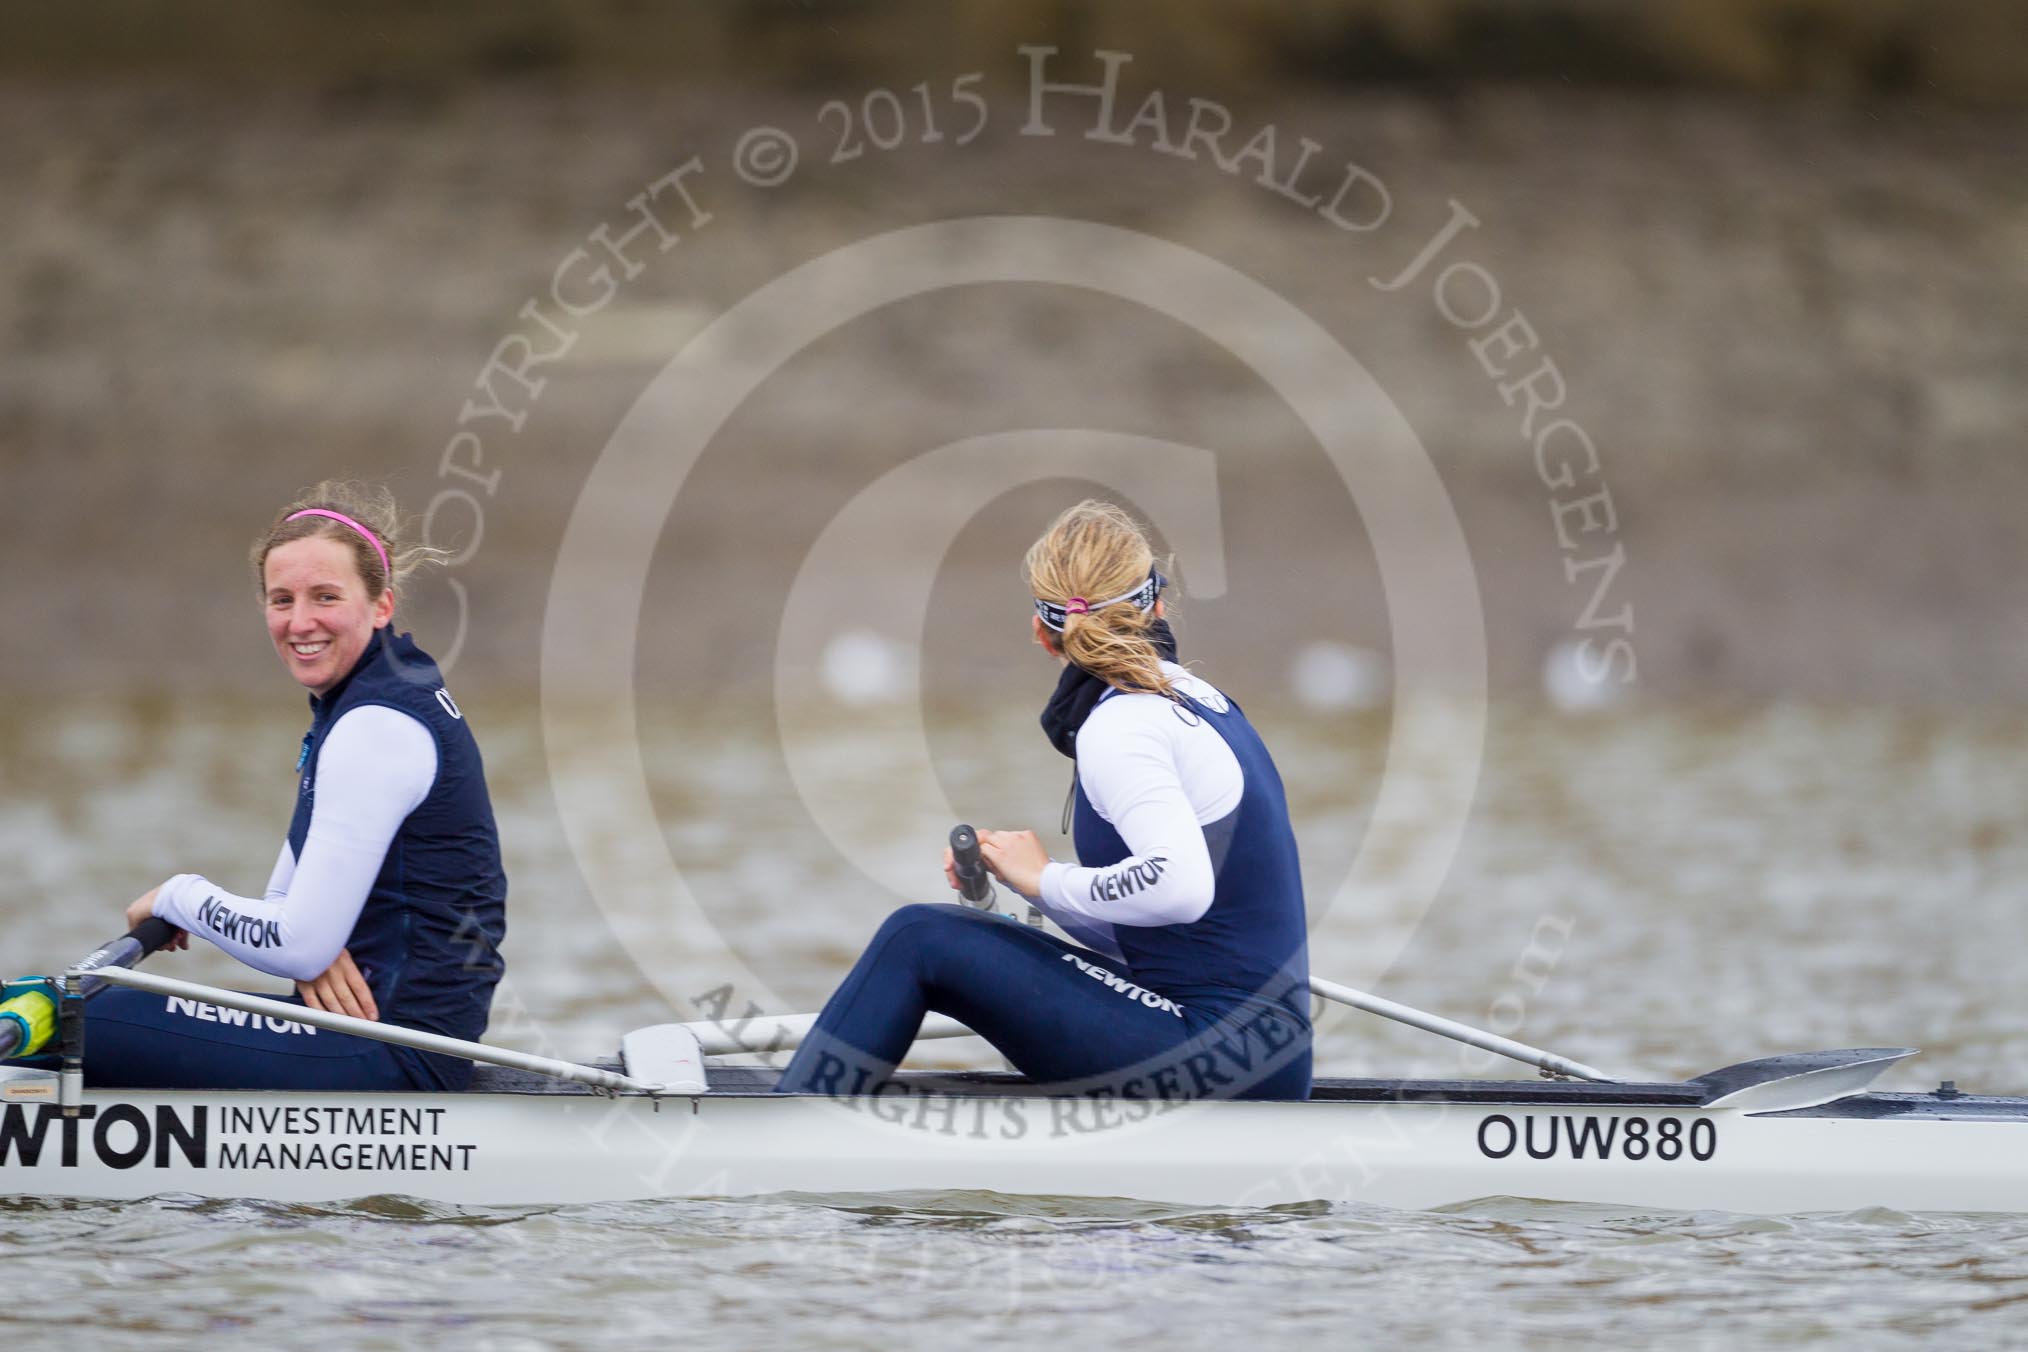 In the OUWBC boat before the race - in the 2 seat the OUWBC president, Anastasia Chitty, and at bow Maxie Scheske.